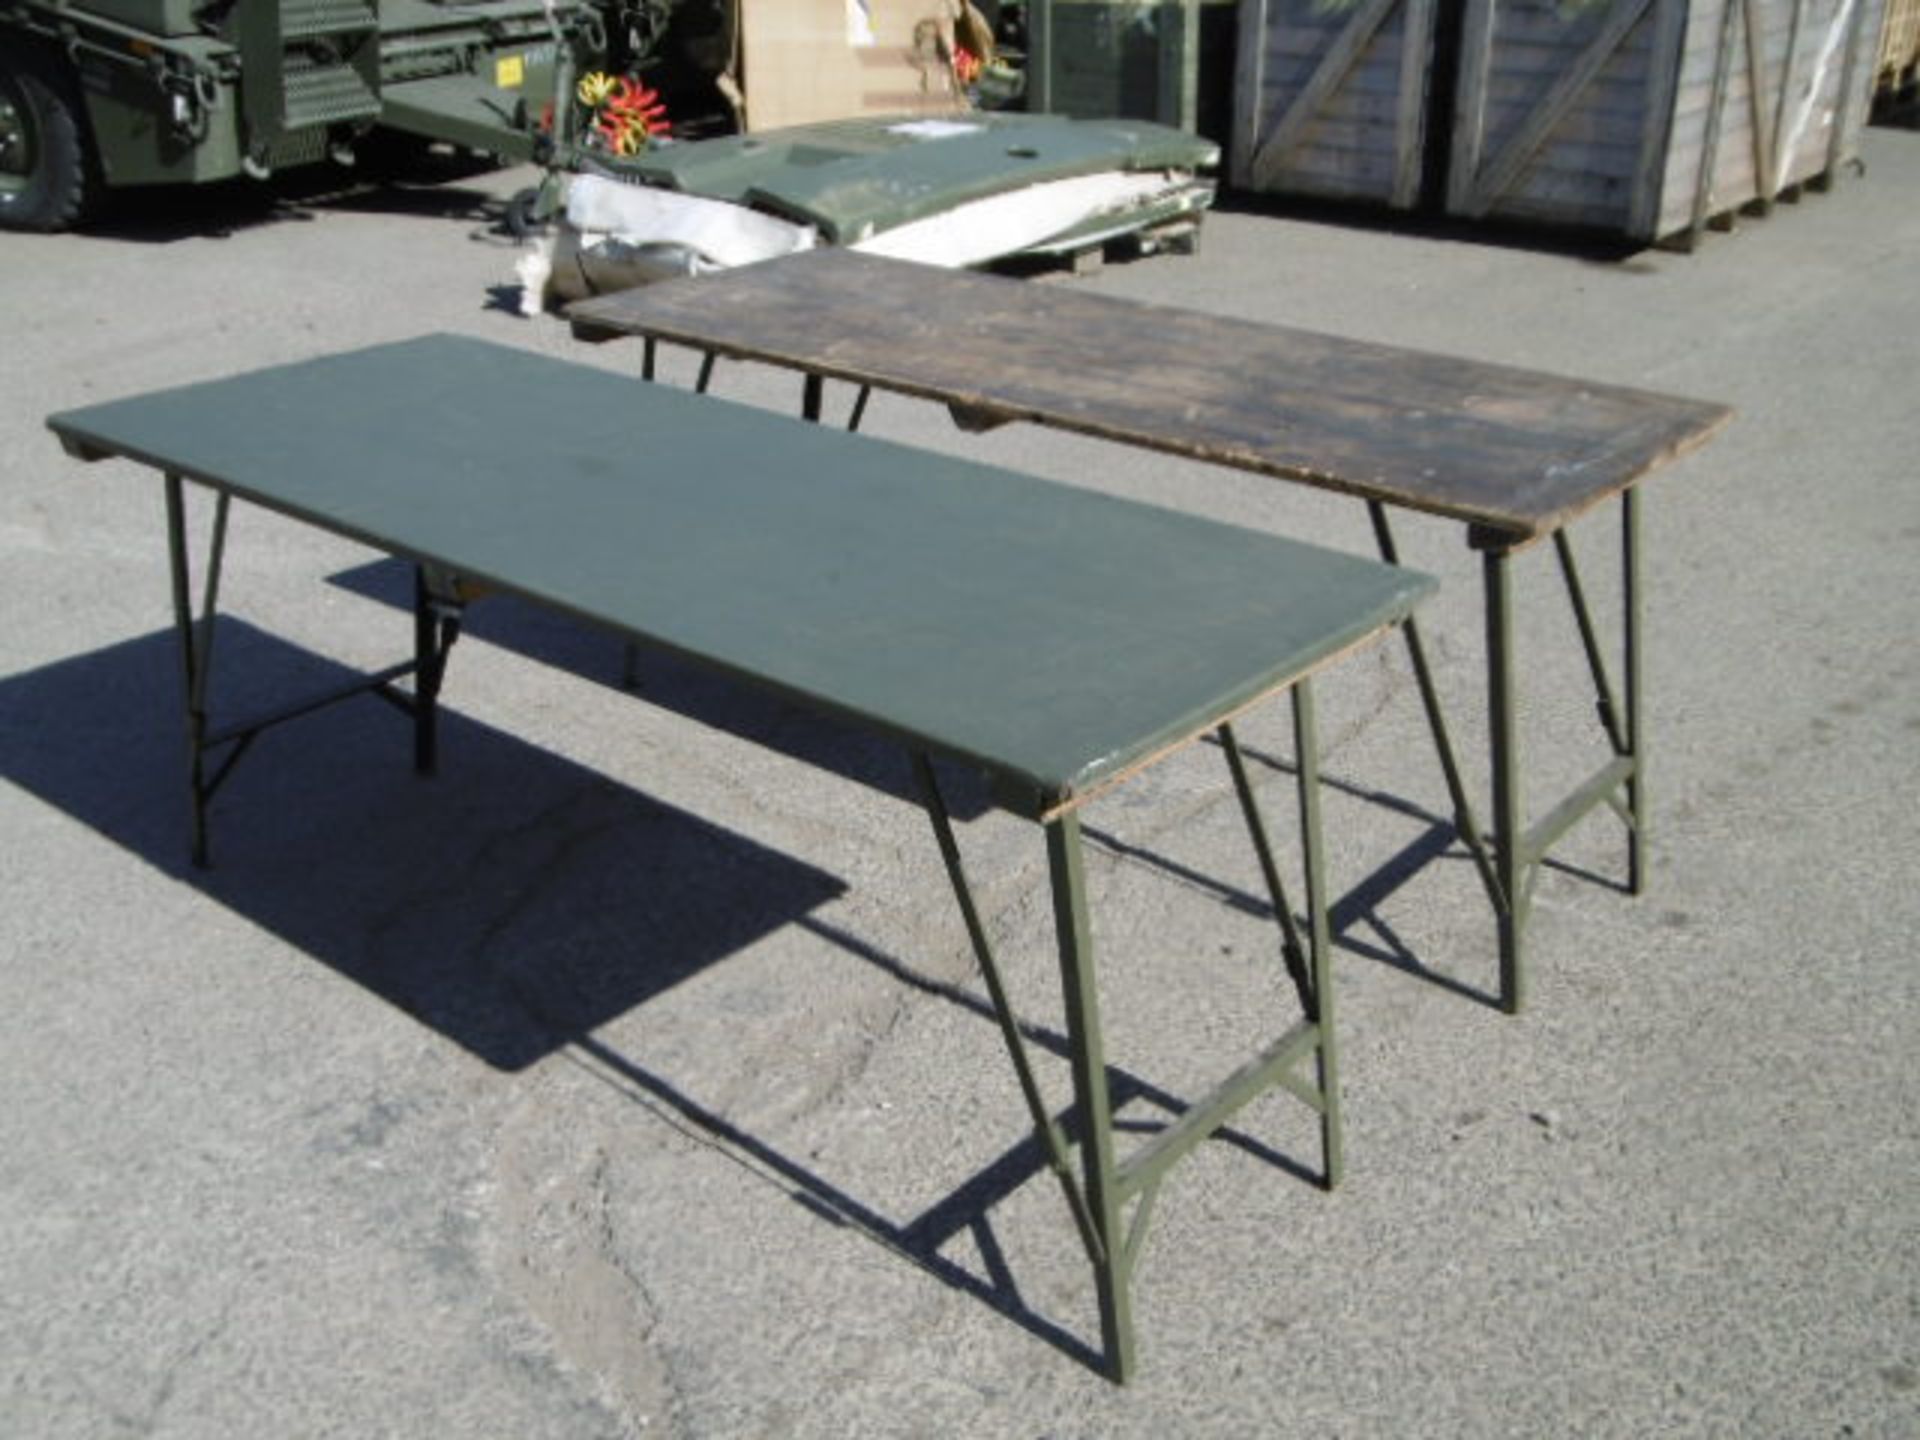 2 x Collapsible Tressle Table - Image 4 of 6